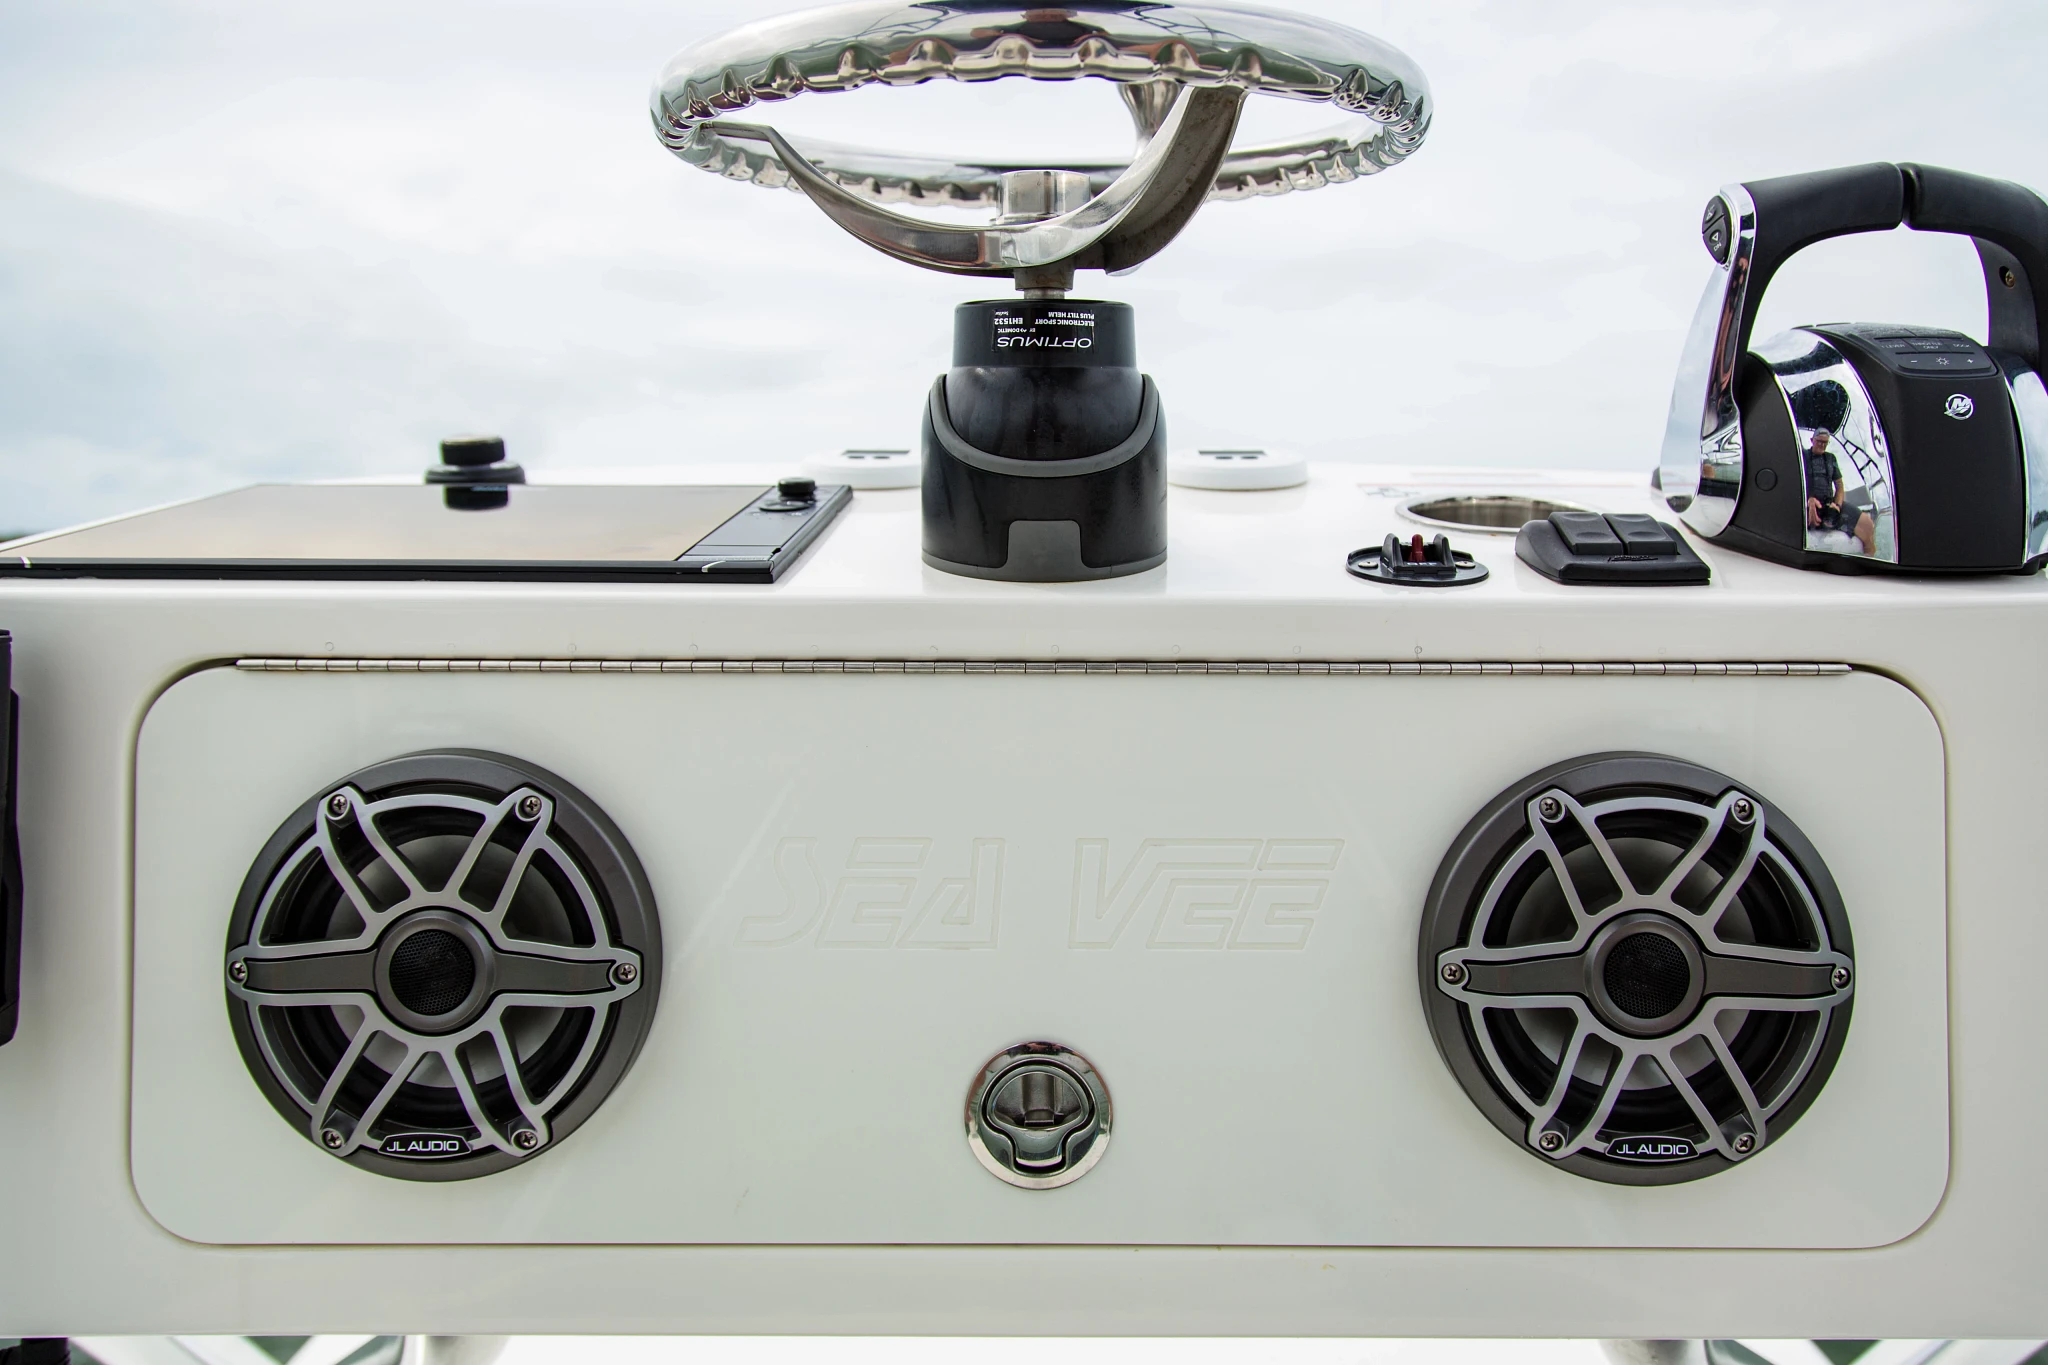 marine audio speakers added to a boat with grilles.